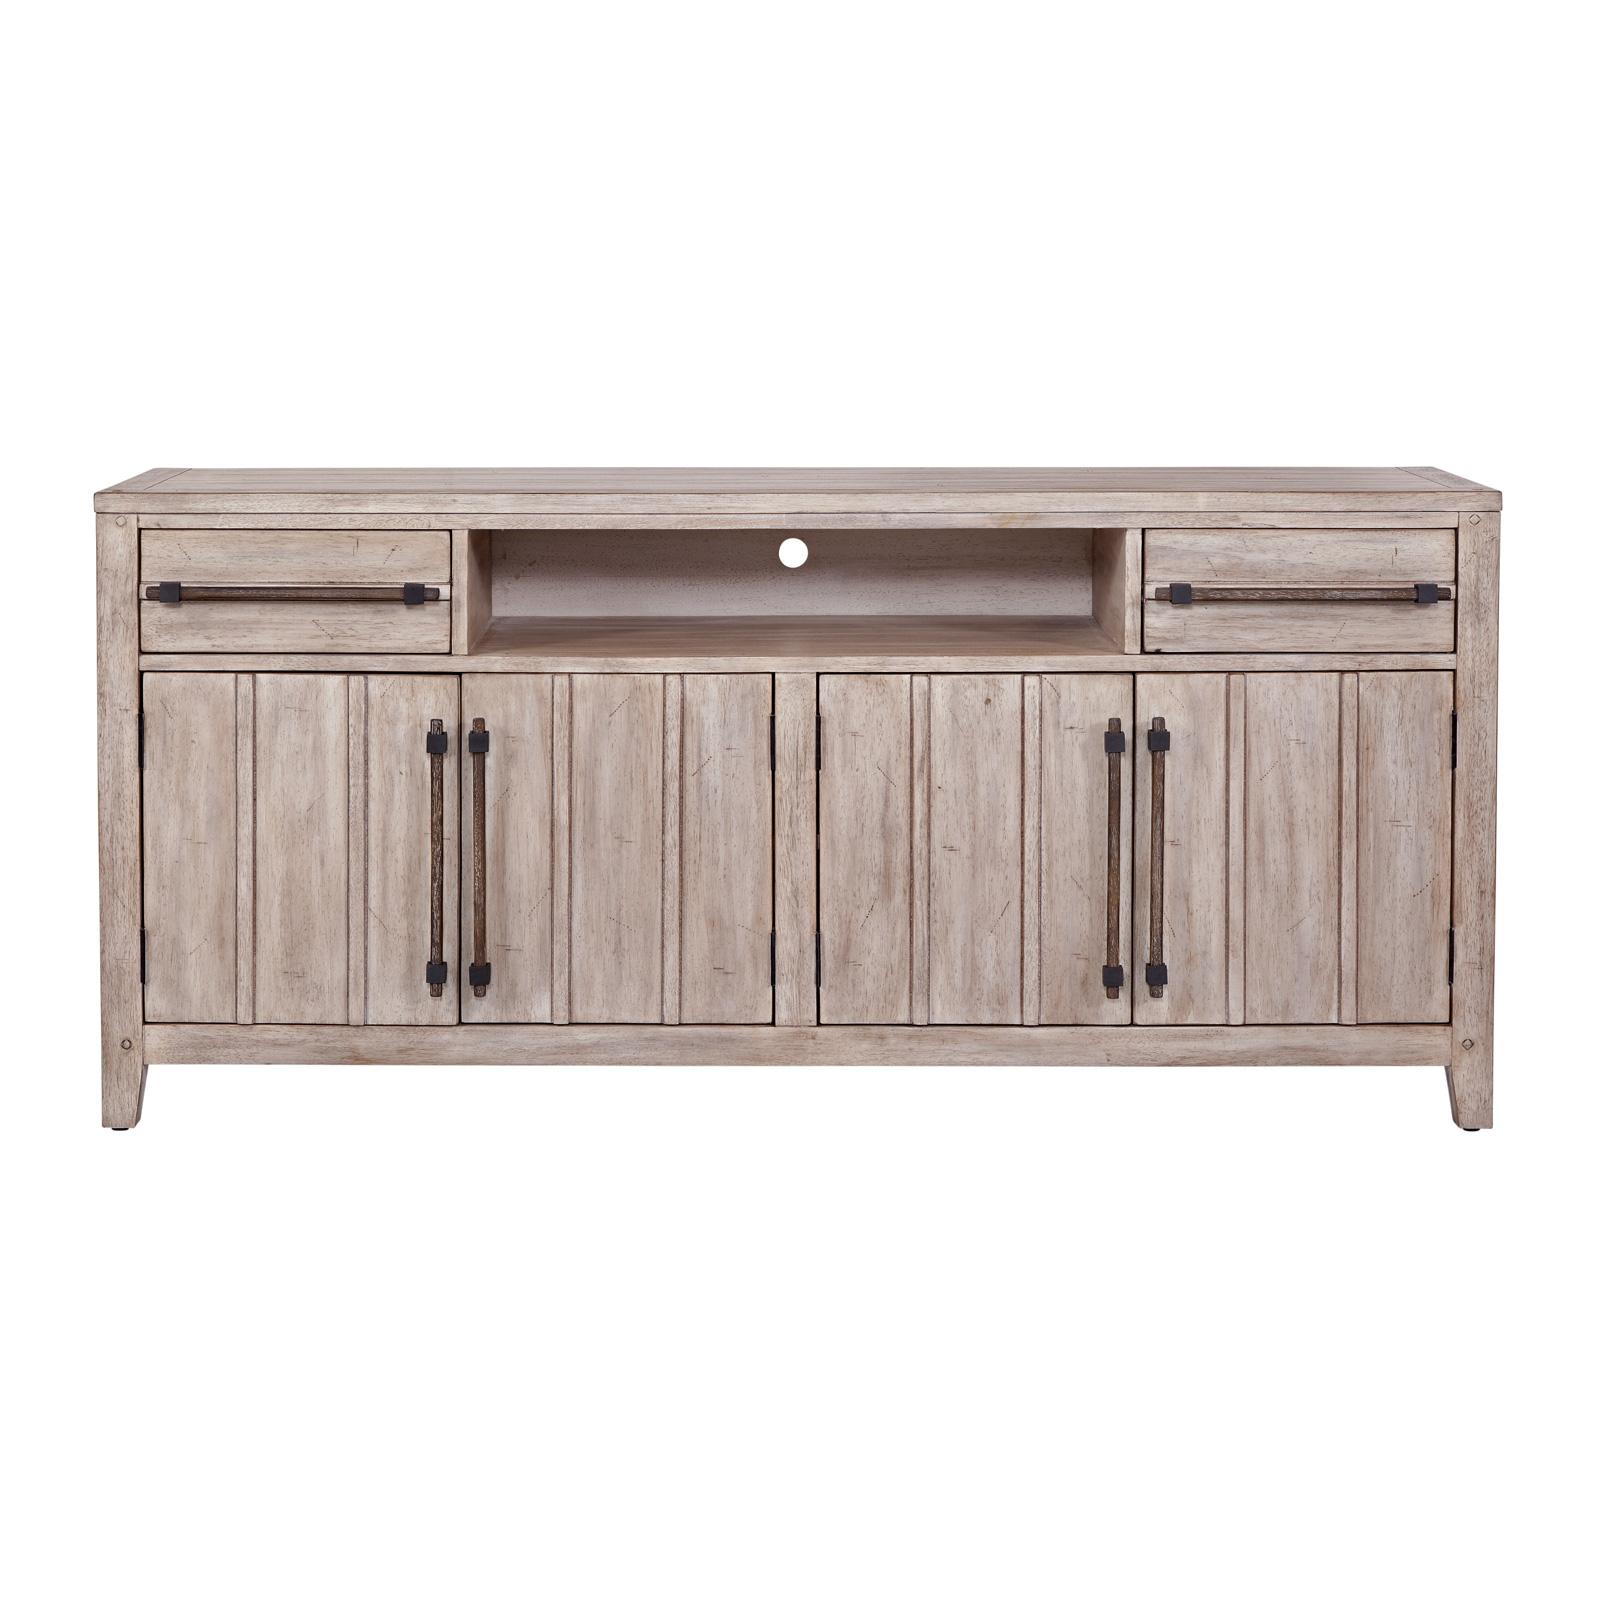 American Woodcrafters AURORA 2810-224 Tv Console